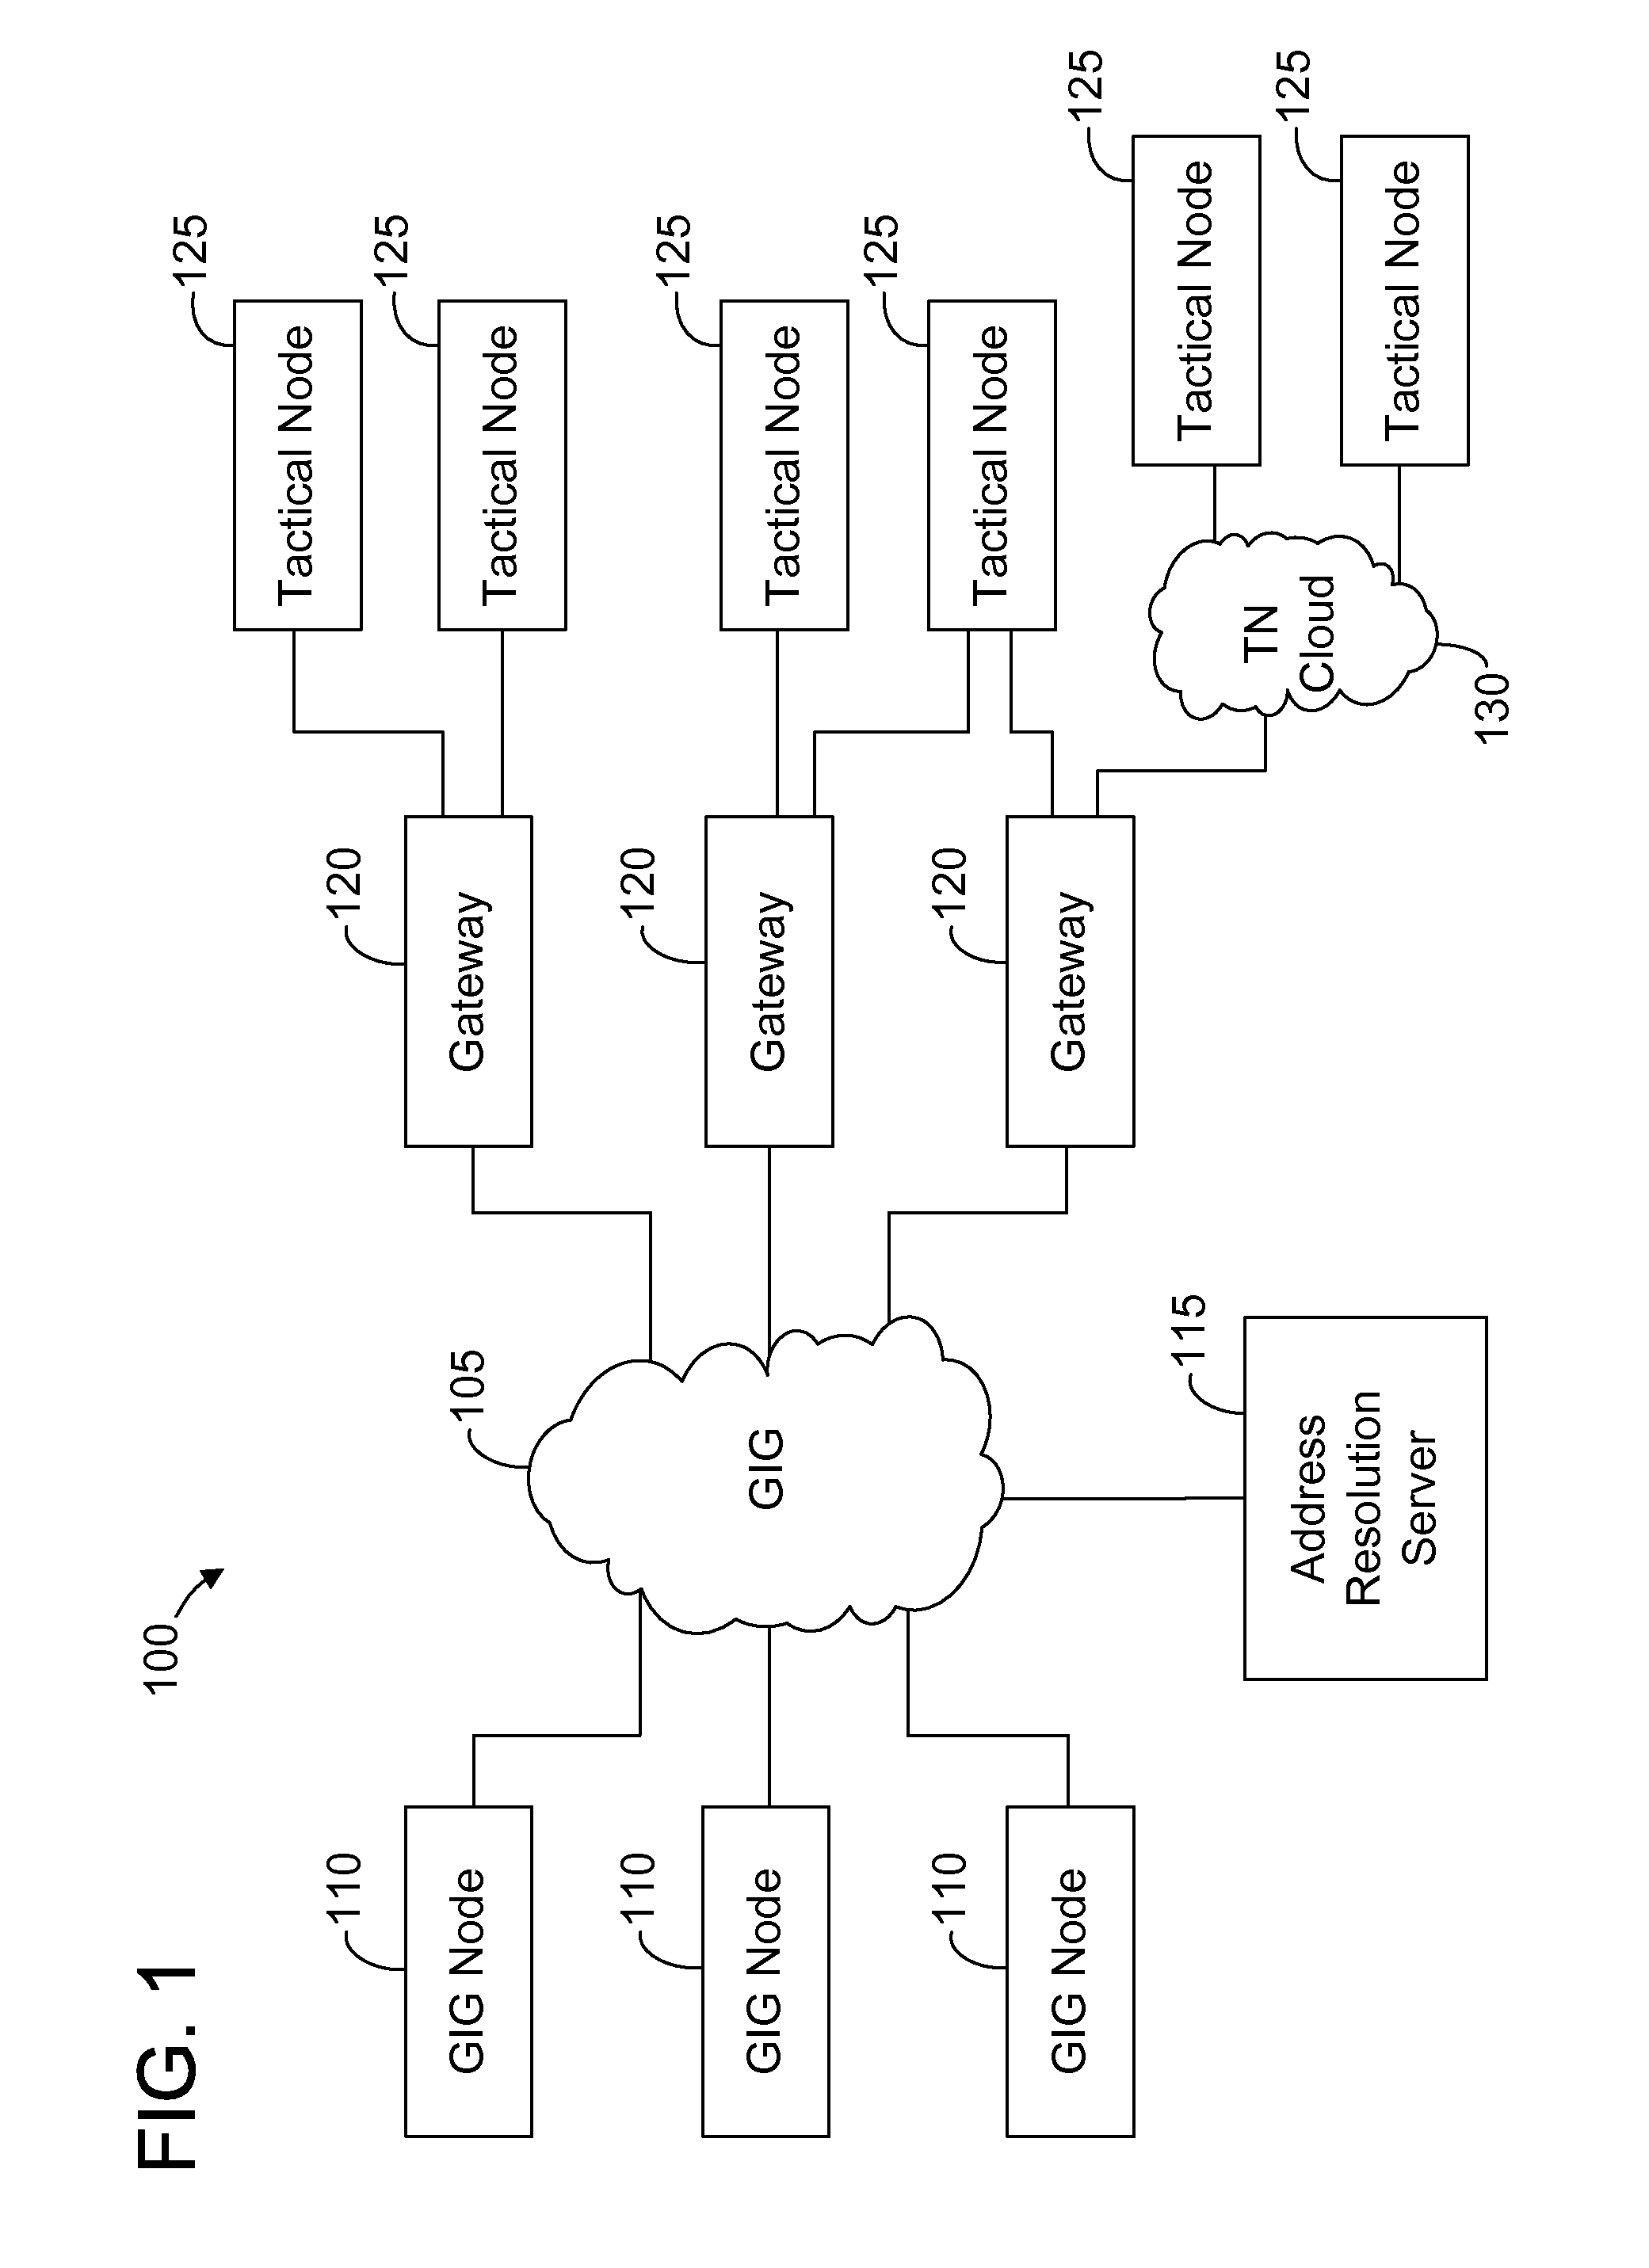 System, apparatus, and method for communication in a tactical network